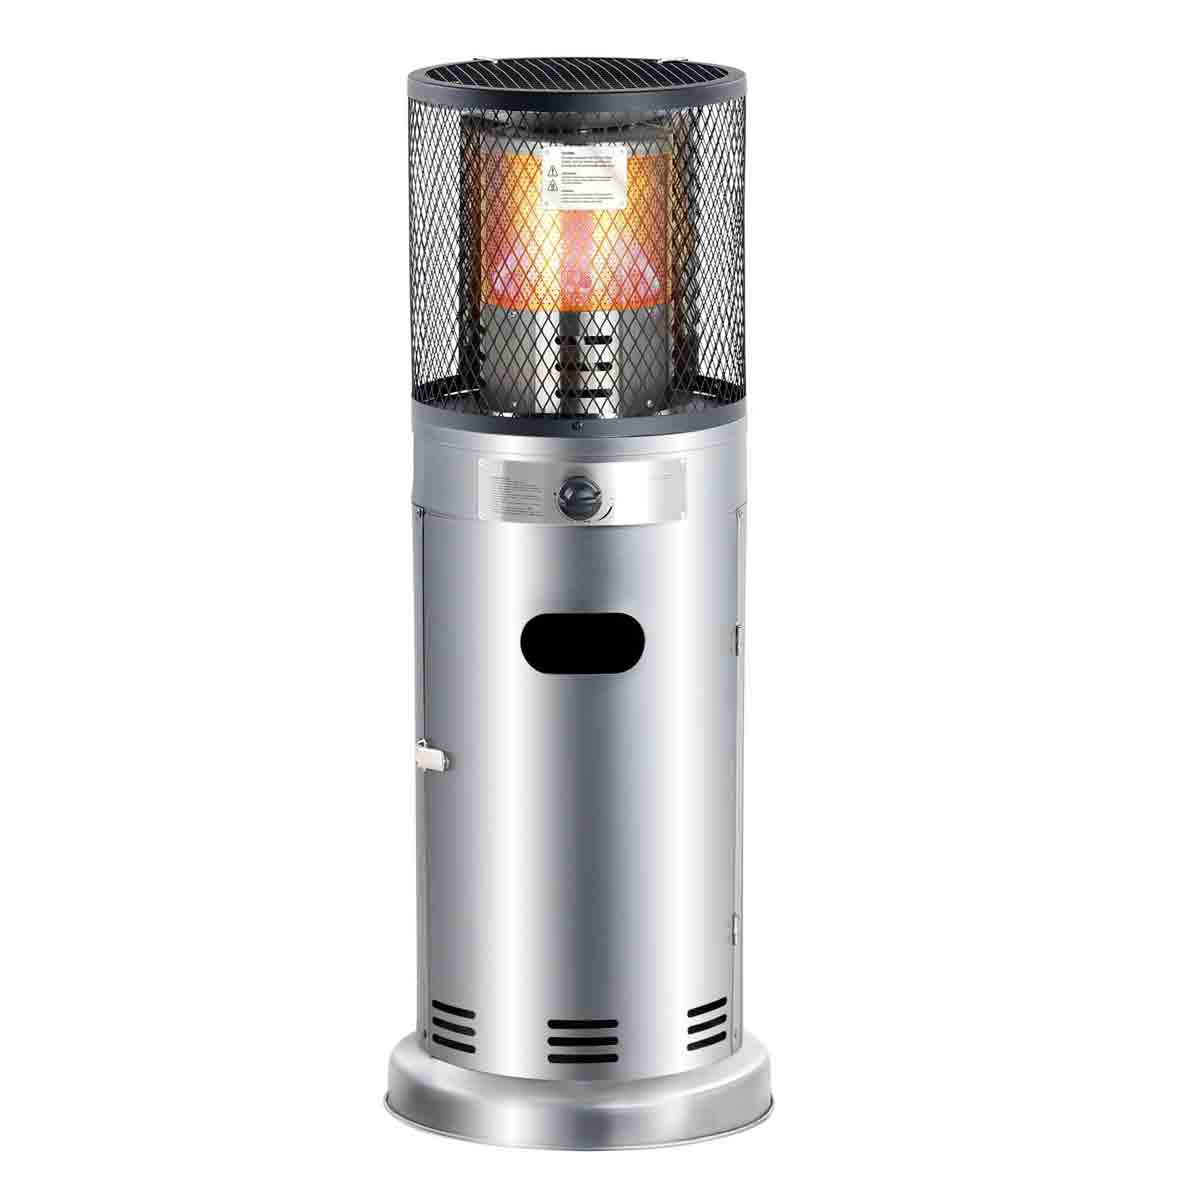 Callow Inferno Stainless Steel 7KW Patio Heater